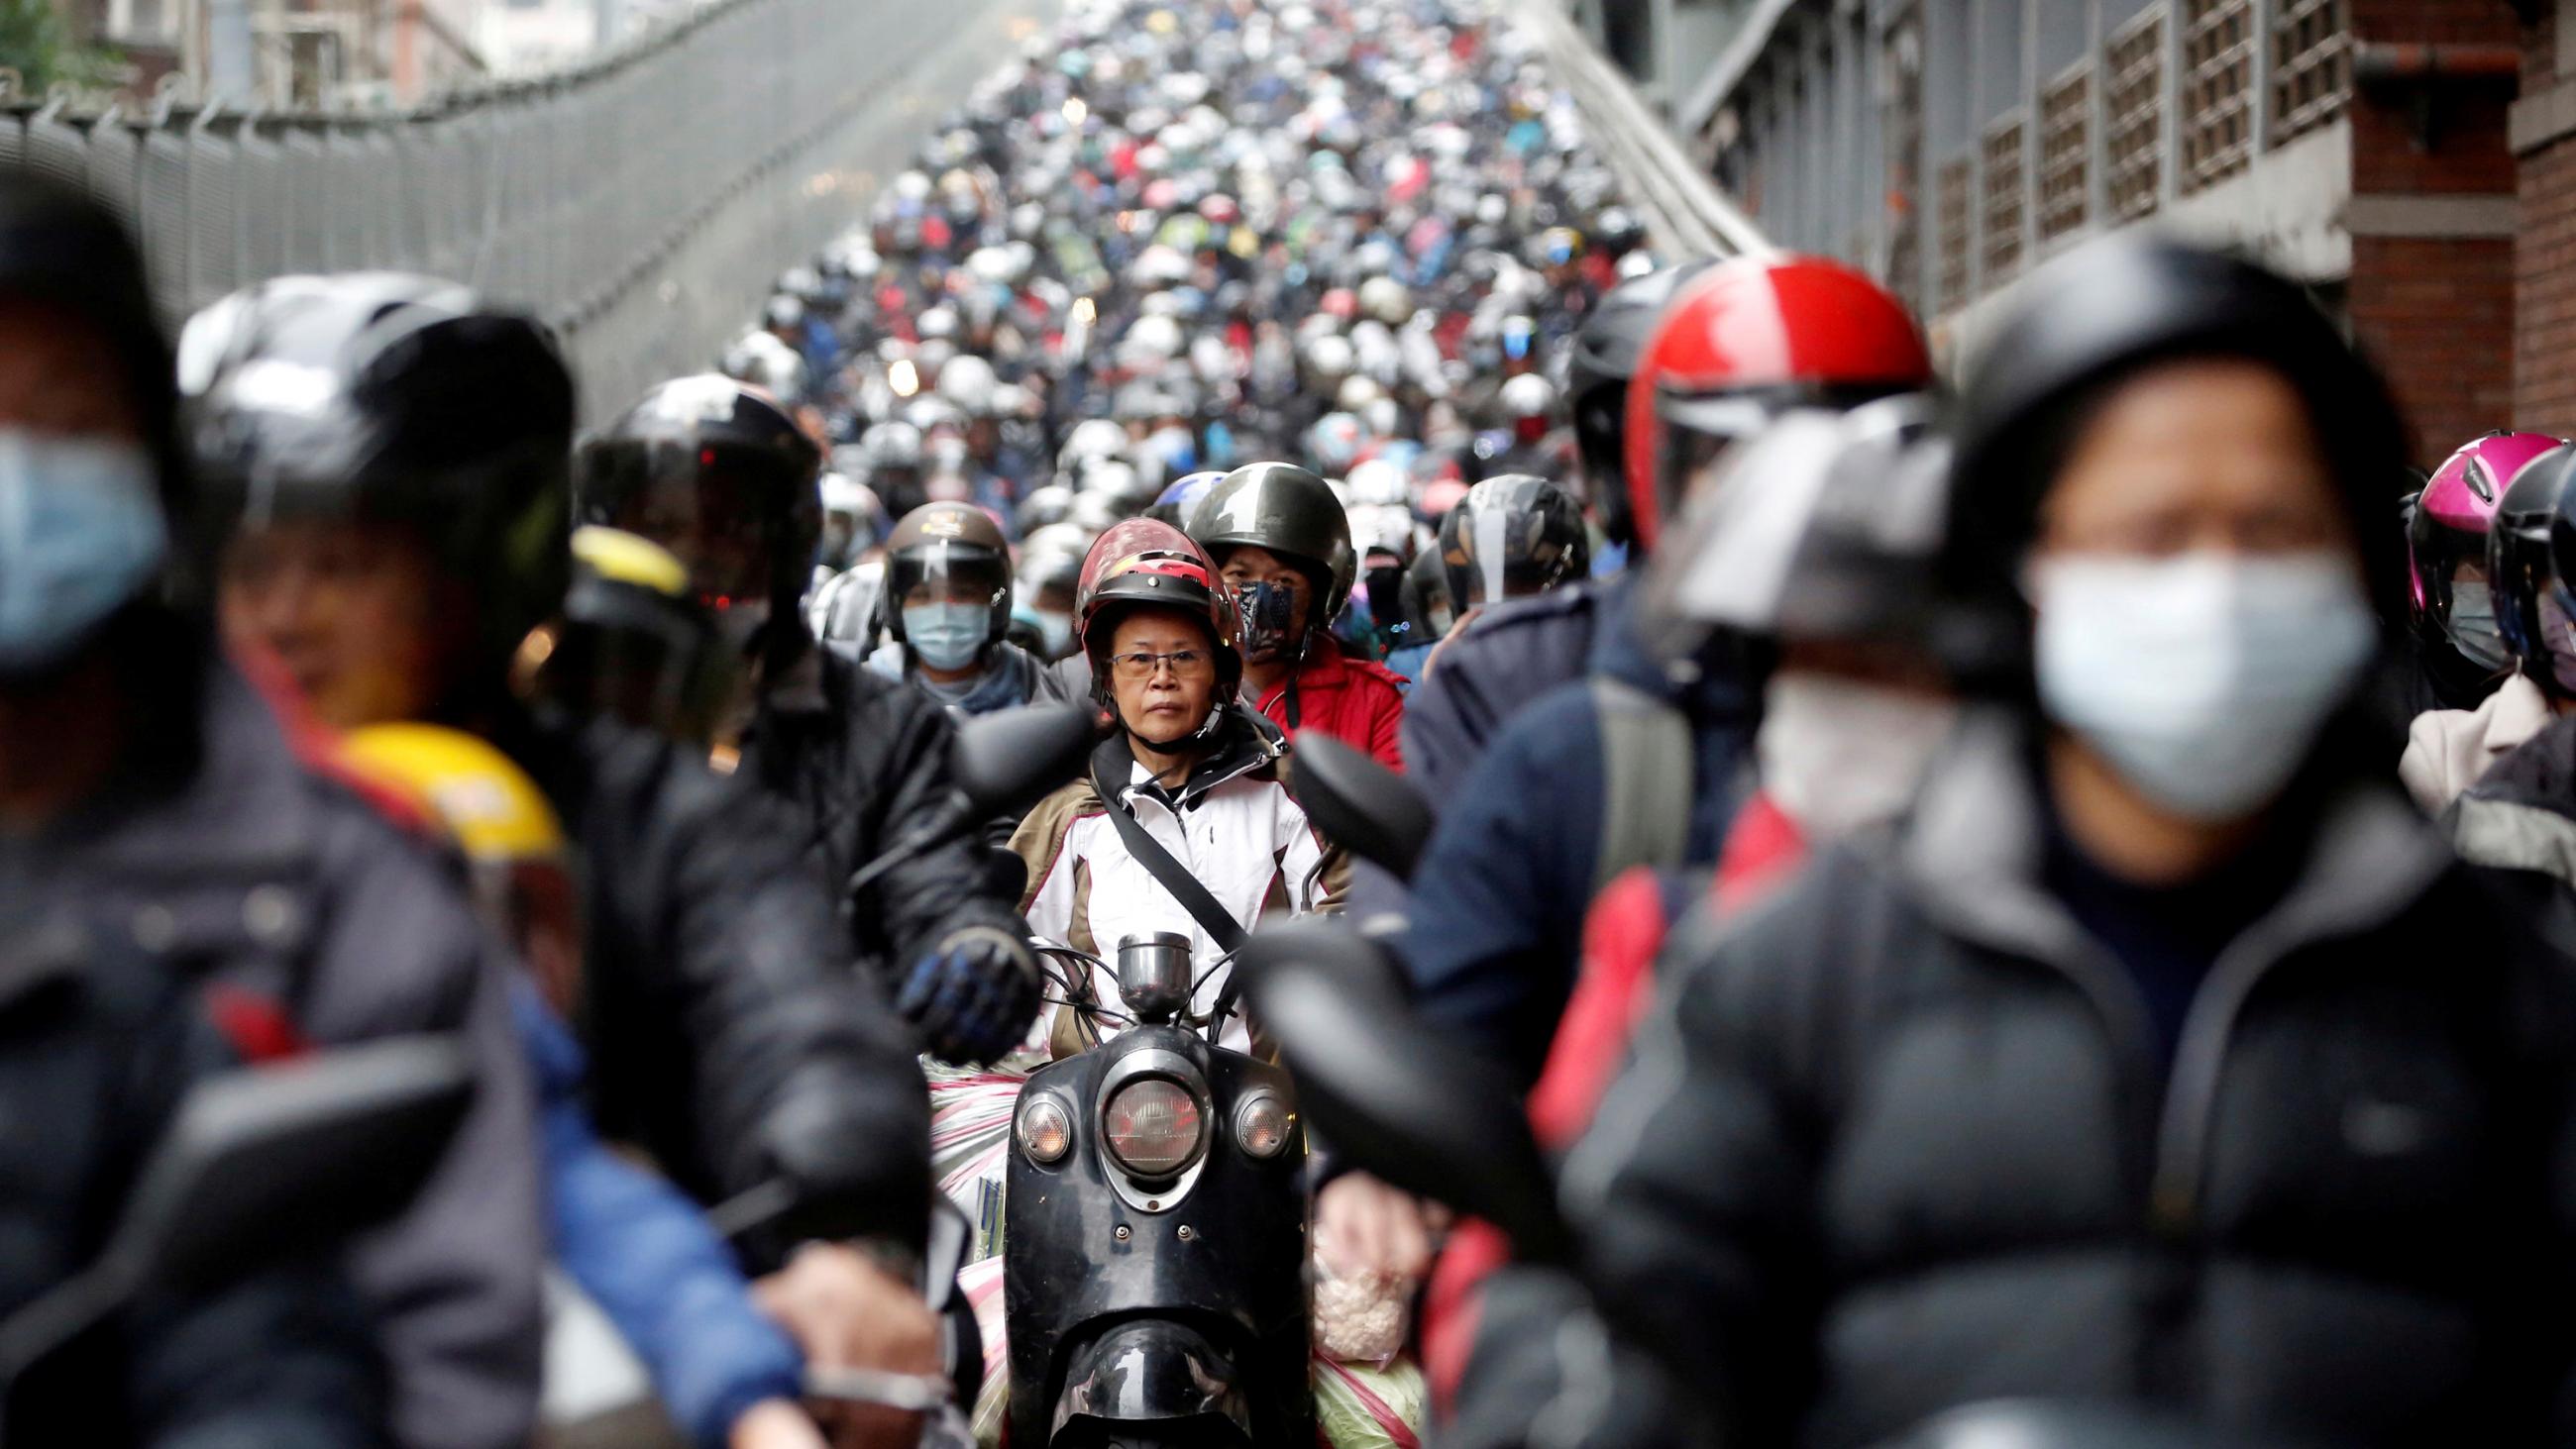 The photo shows a wide avenue filled with motorcycles heading toward the camera lens. 